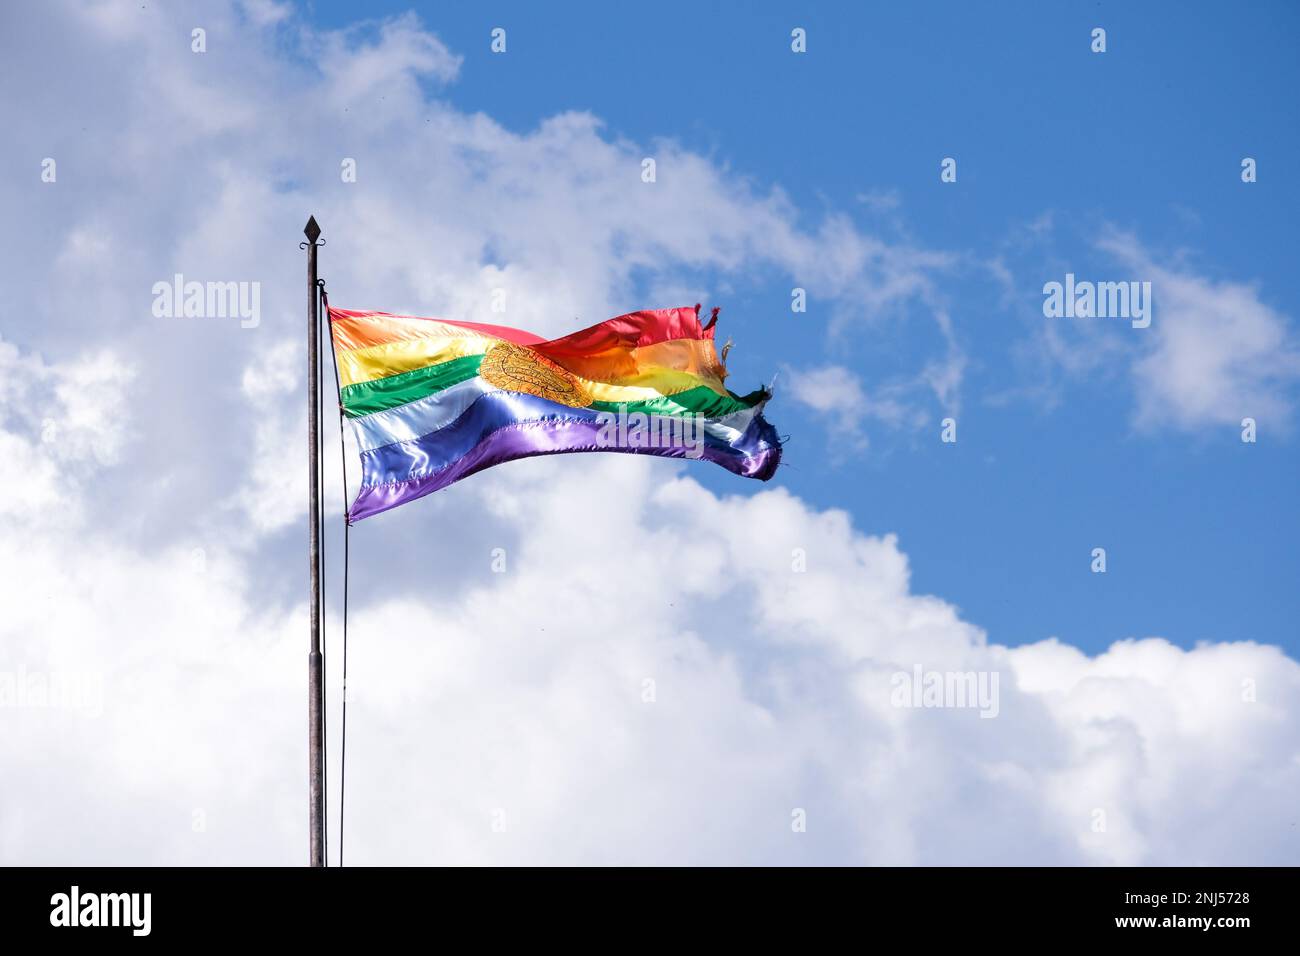 The official colorful flag of Cusco waving in the sky. It has seven horizontal stripes of color. Gay Pride flag. Stock Photo